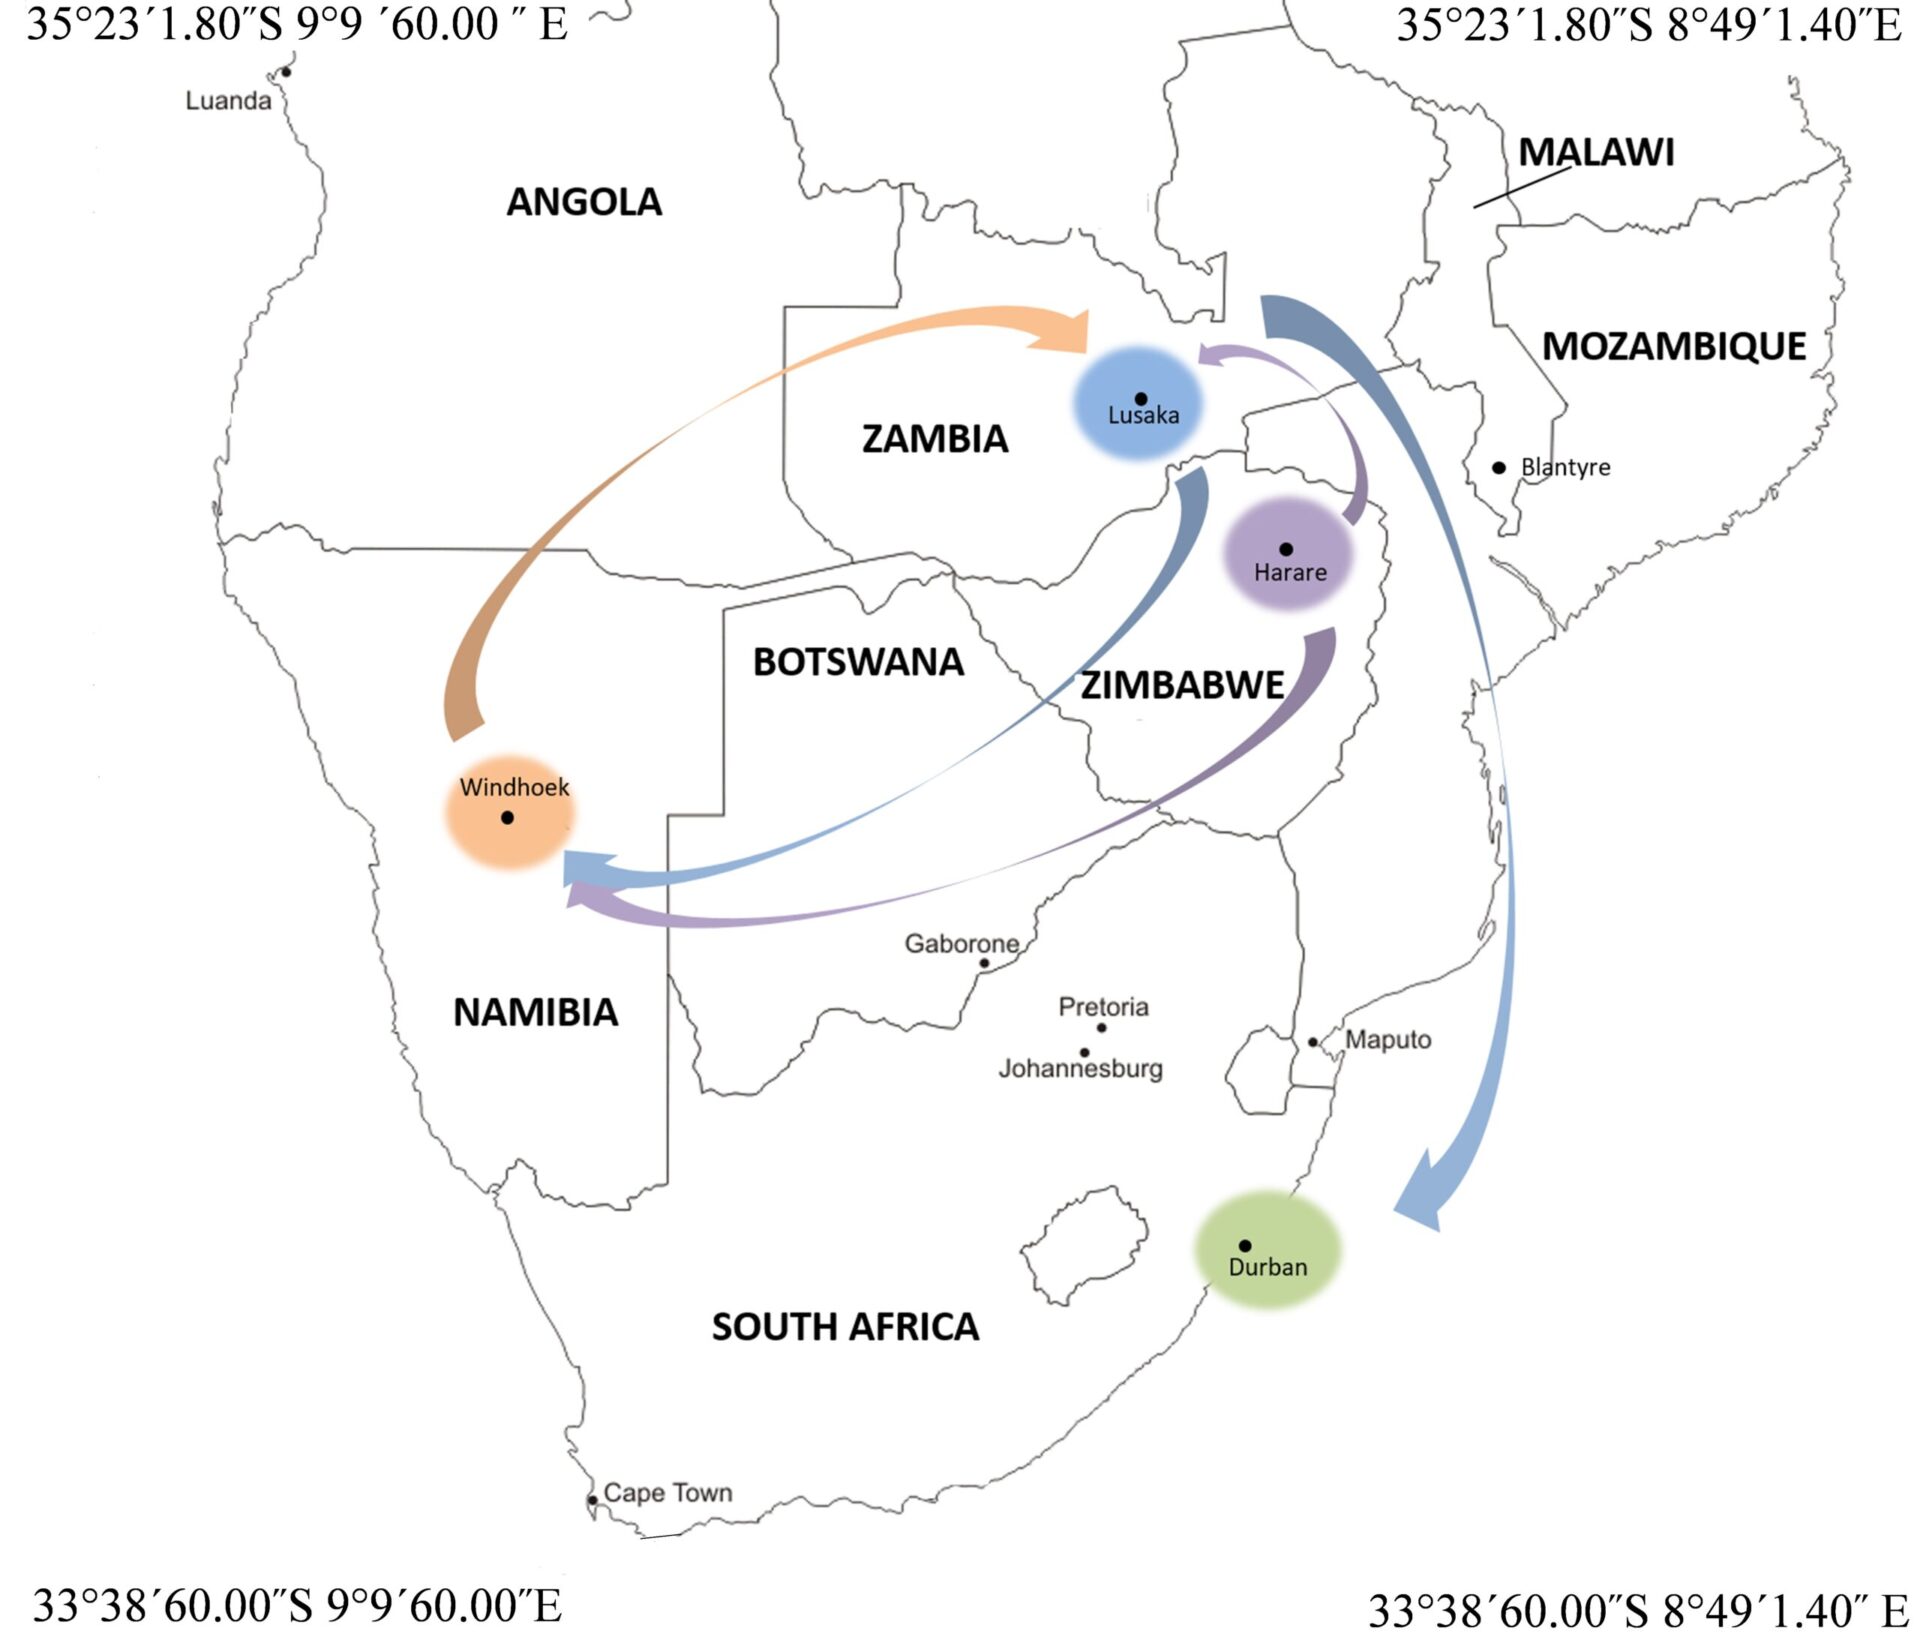 Map showing city exchange routes between the cities of Durban, Harare, Lusaka and Windhoek in southern Africa